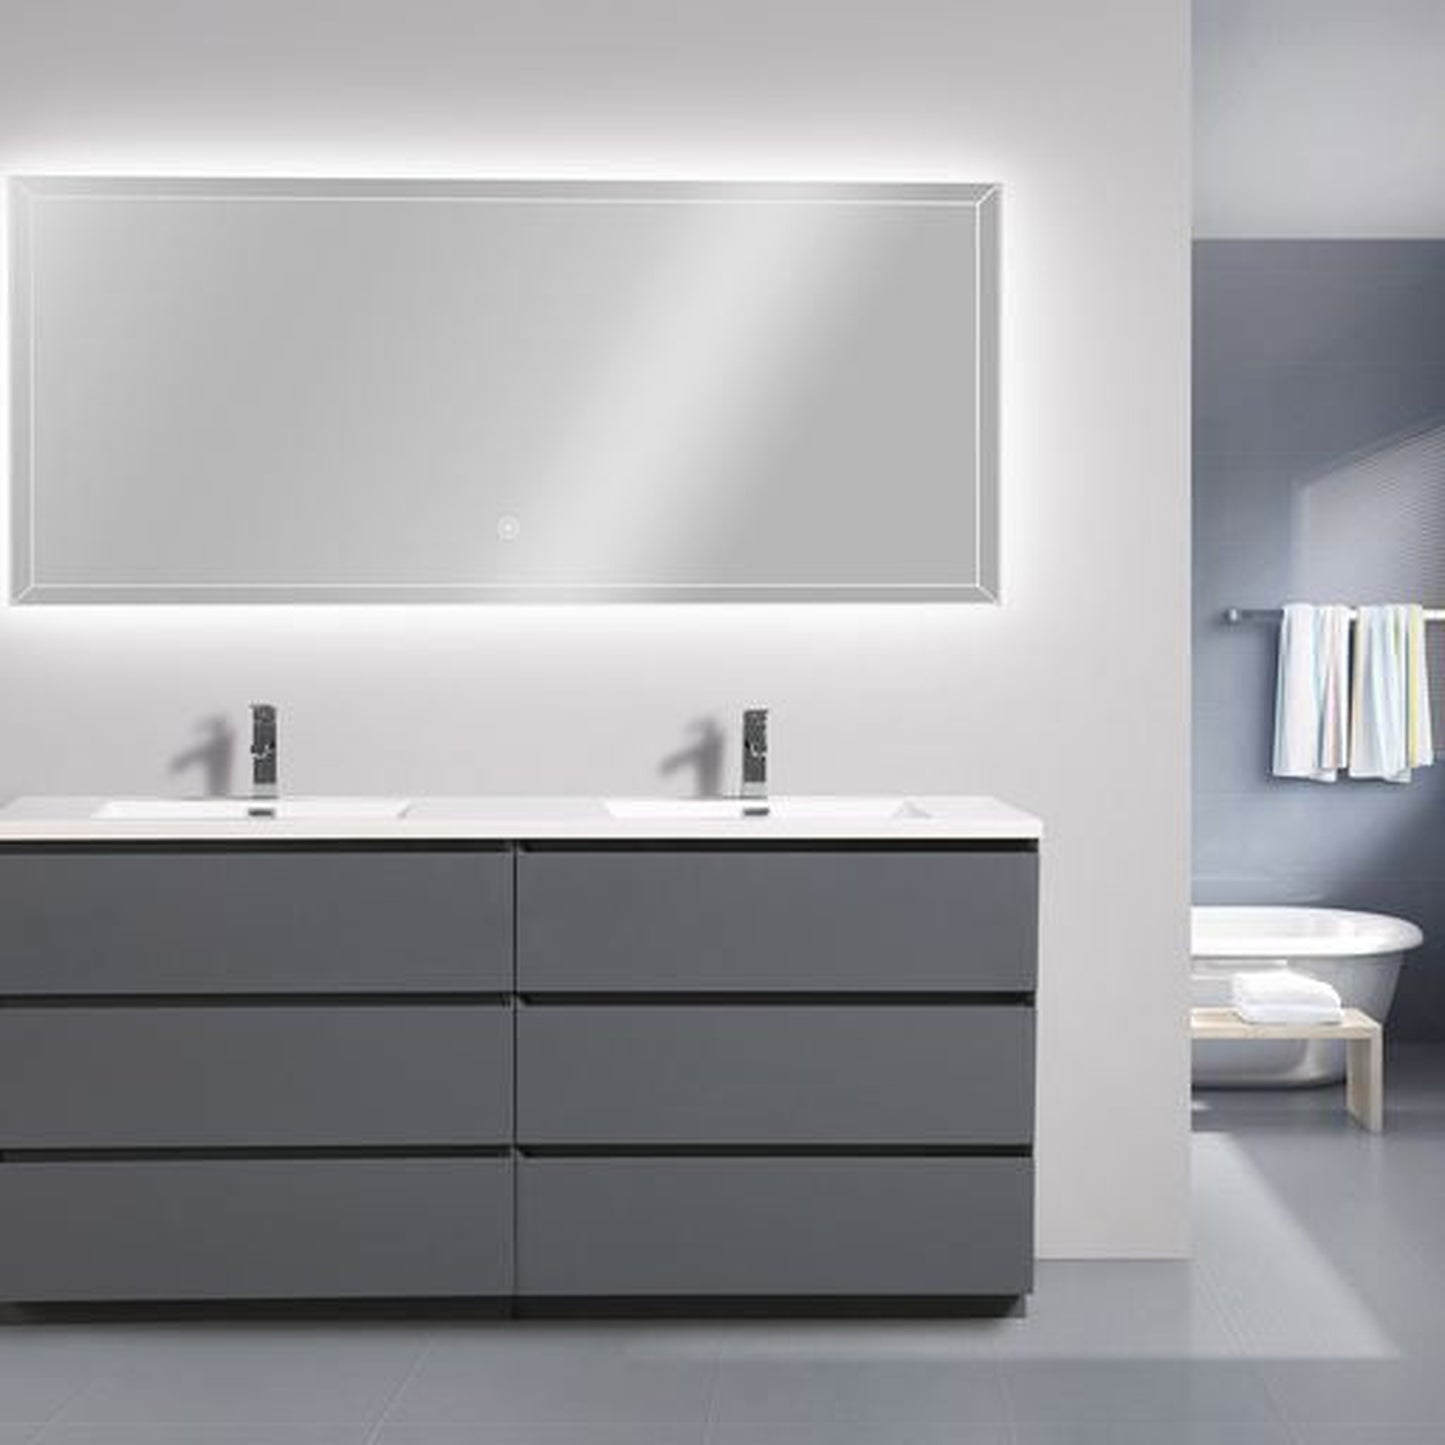 Moreno Bath Angeles 72" High Gloss Gray Freestanding Vanity With Double Reinforced White Acrylic Sinks